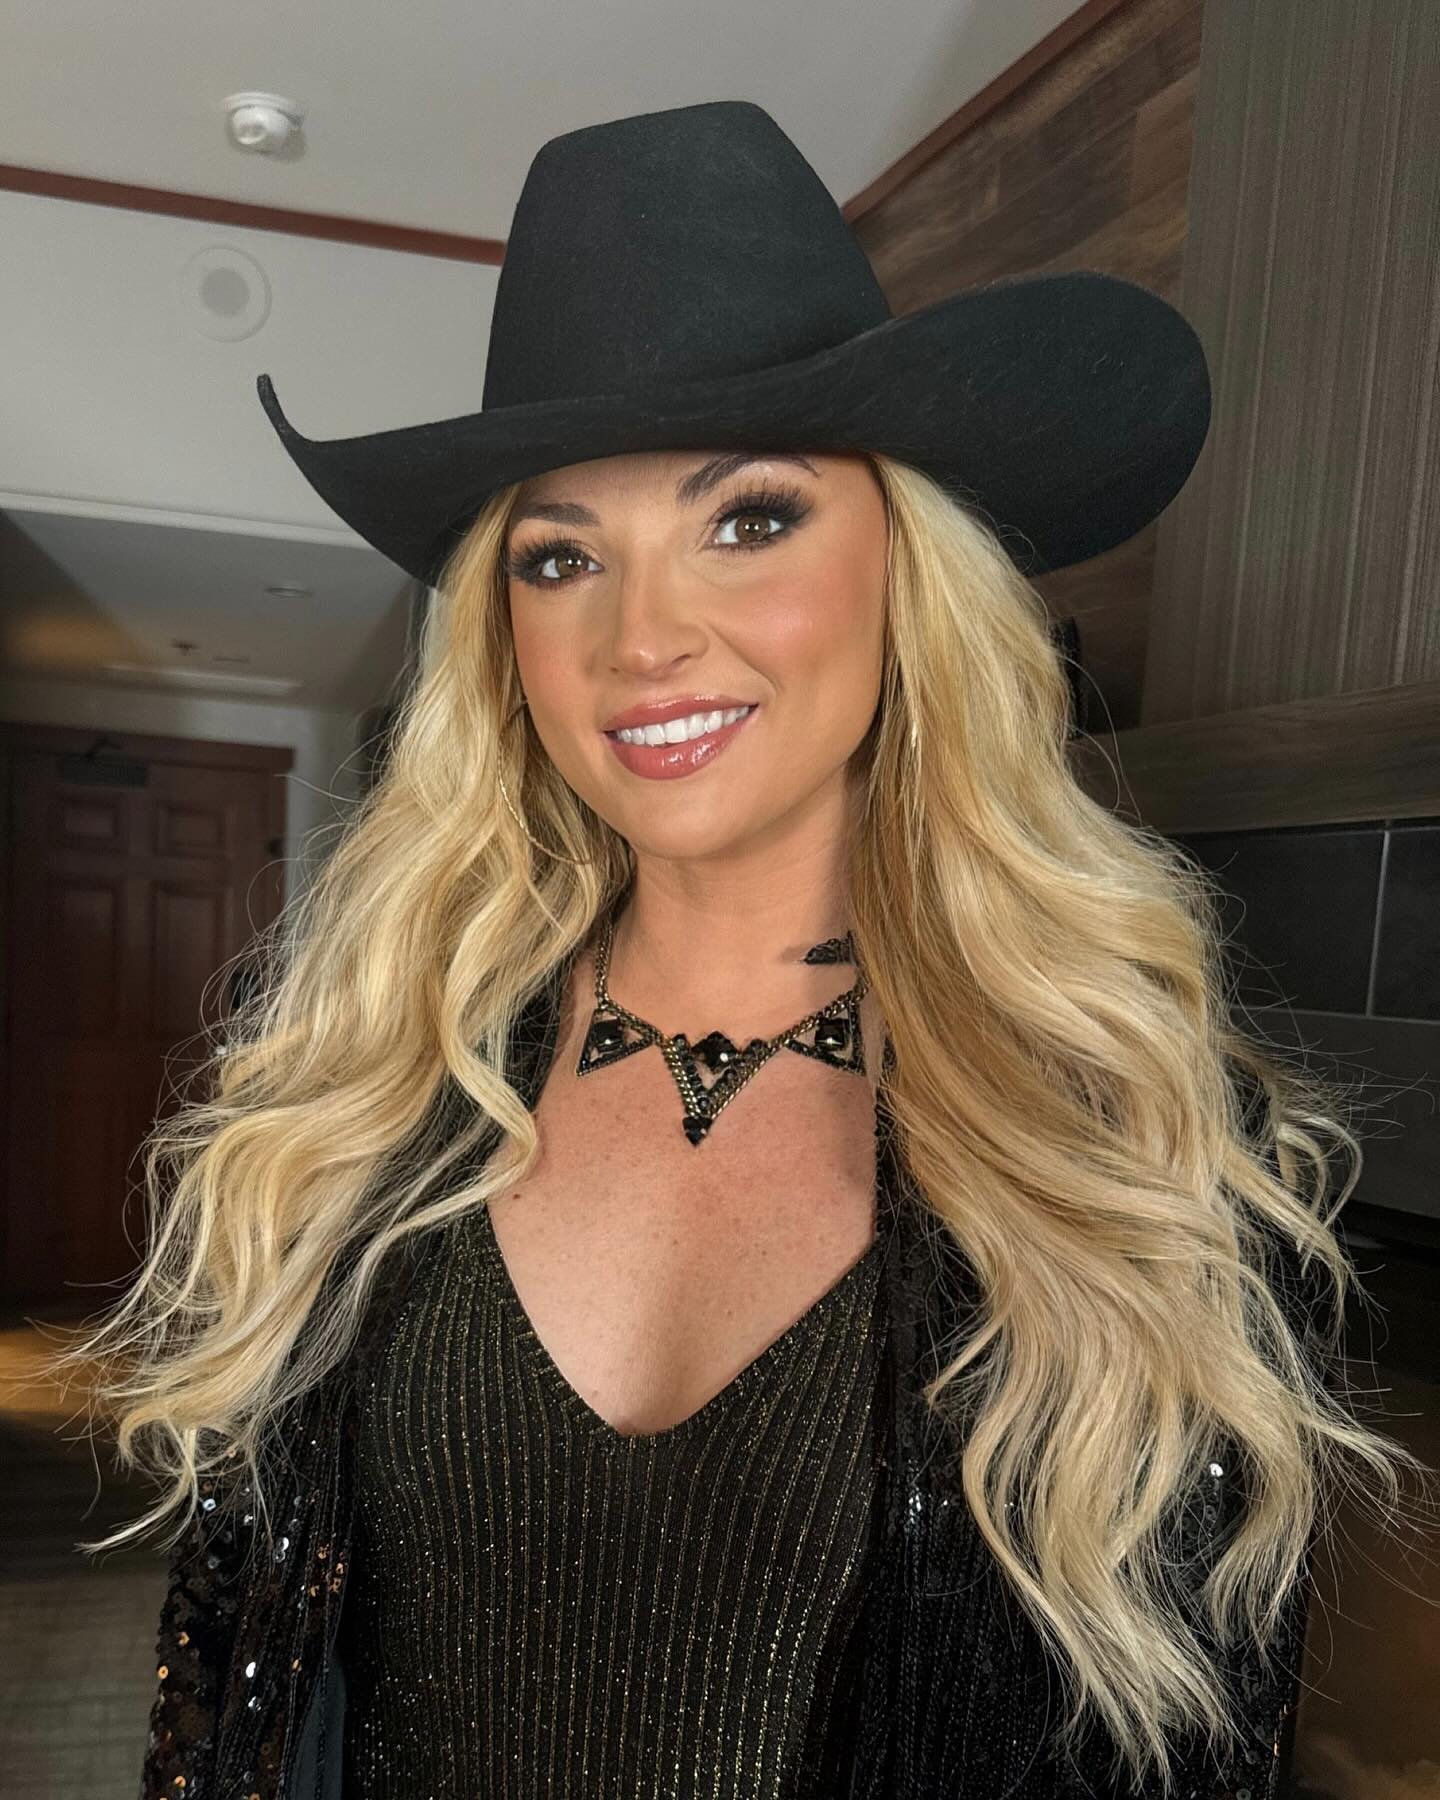 Glam for @karenwaldrupmusic // The total country package. DROP DEAD GORGEOUS. INCREDIBLY talented with a heart of gold. Swipe ➡️ for the SWEETEST glam shout from @karenwaldrupmusic on stage at the @snocasino. 🥹 💄

NOW GO WIN THE @nbcthevoice @karen